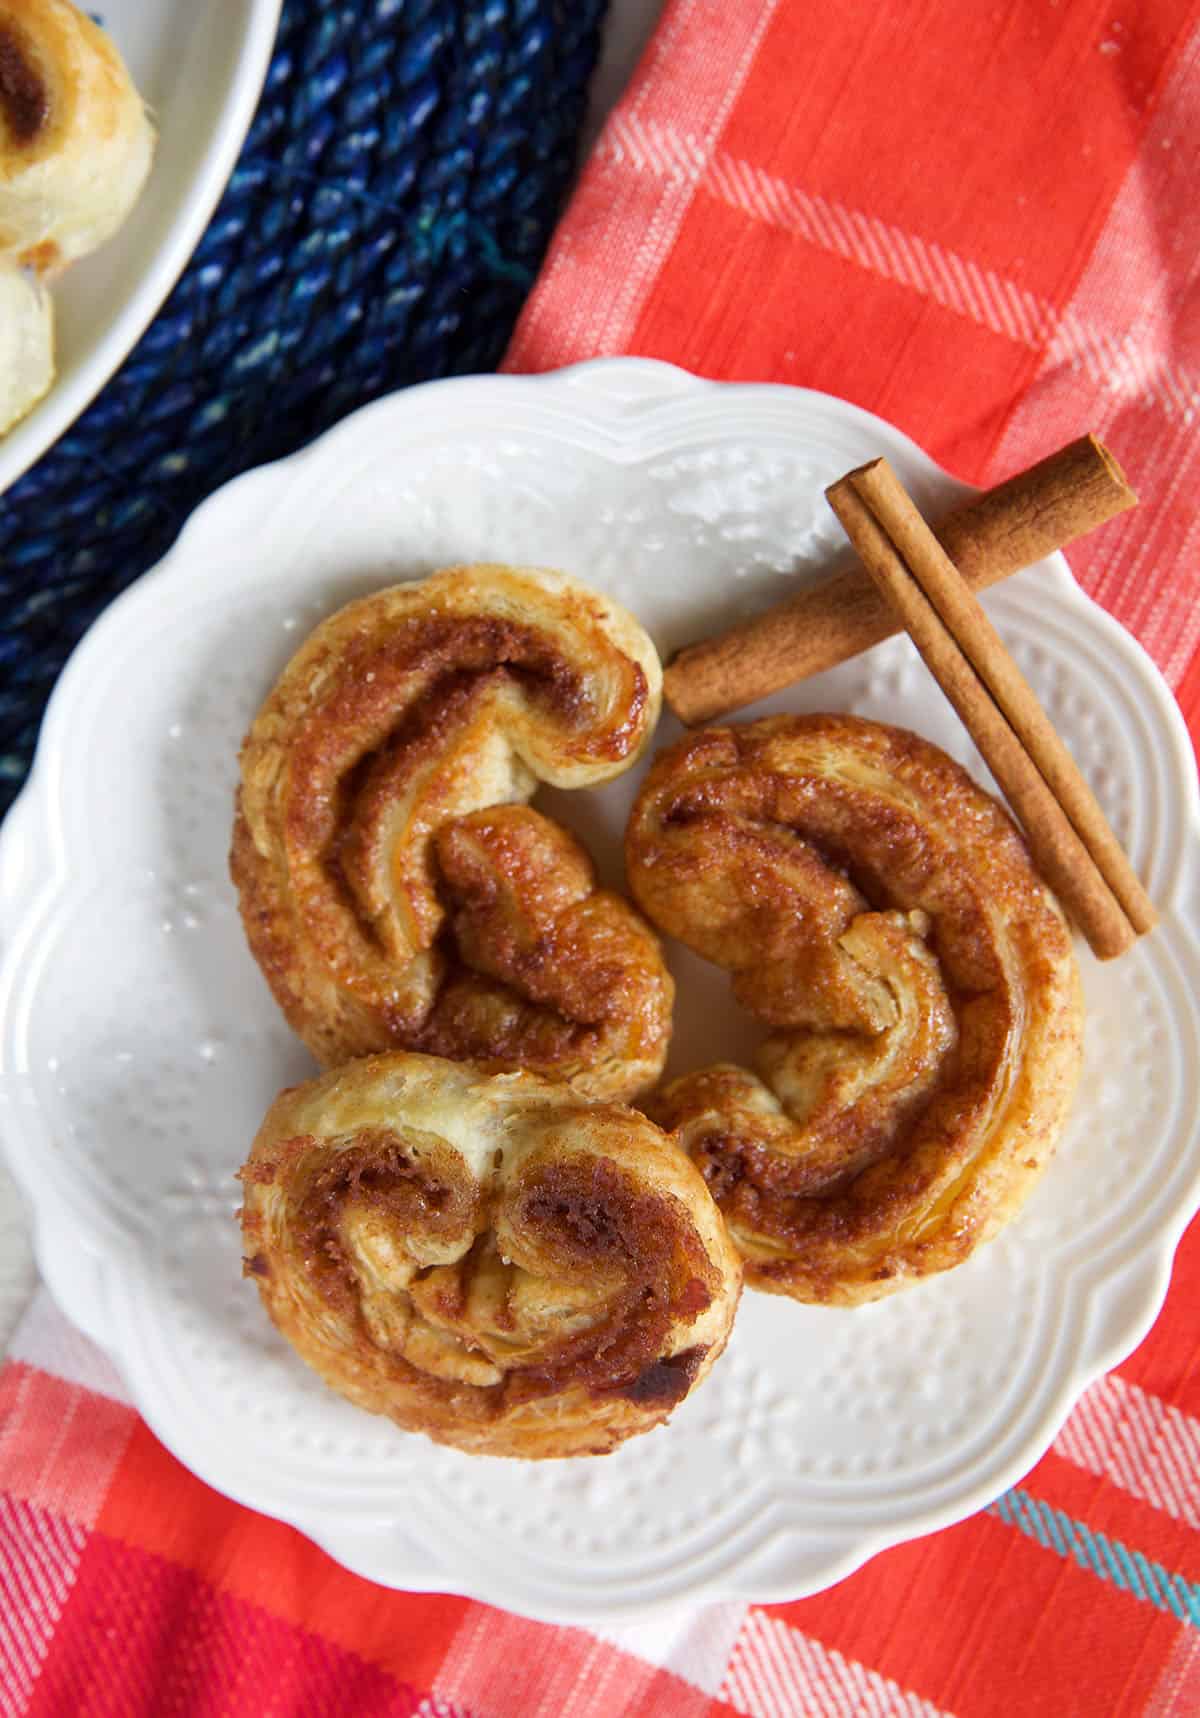 Three palmiers are placed on a white plate with two small cinnamon sticks. 